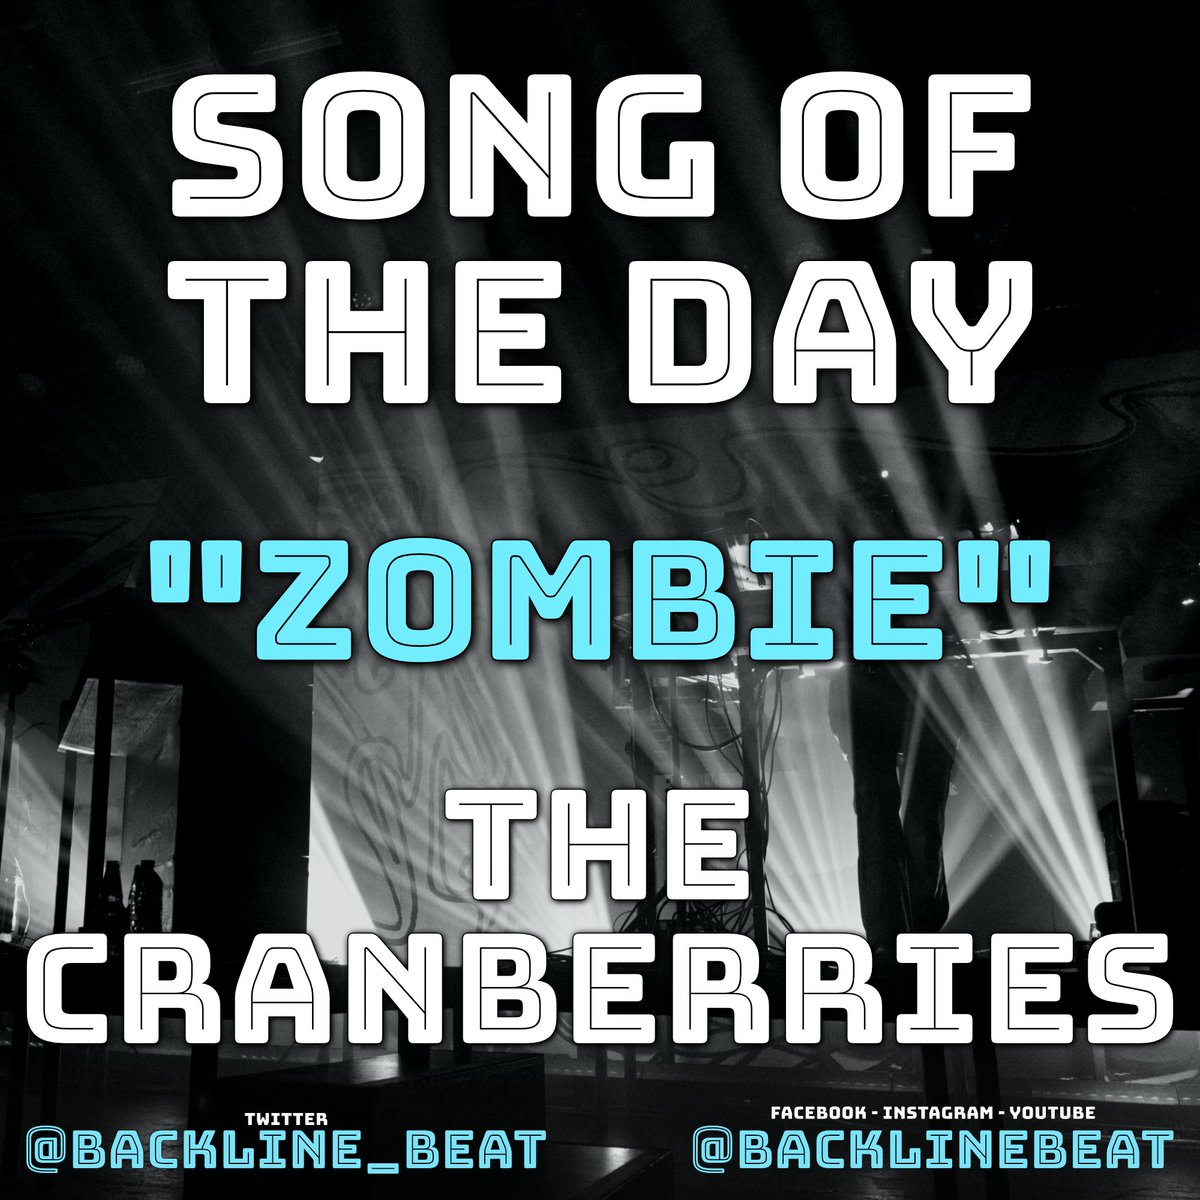 Song of the Day: 'Zombie' by The Cranberries
backlinebeat.com 
..
#songoftheday #zombie #thecranberries #thecranberrieszombie #song #songs #music #90s #90smusic